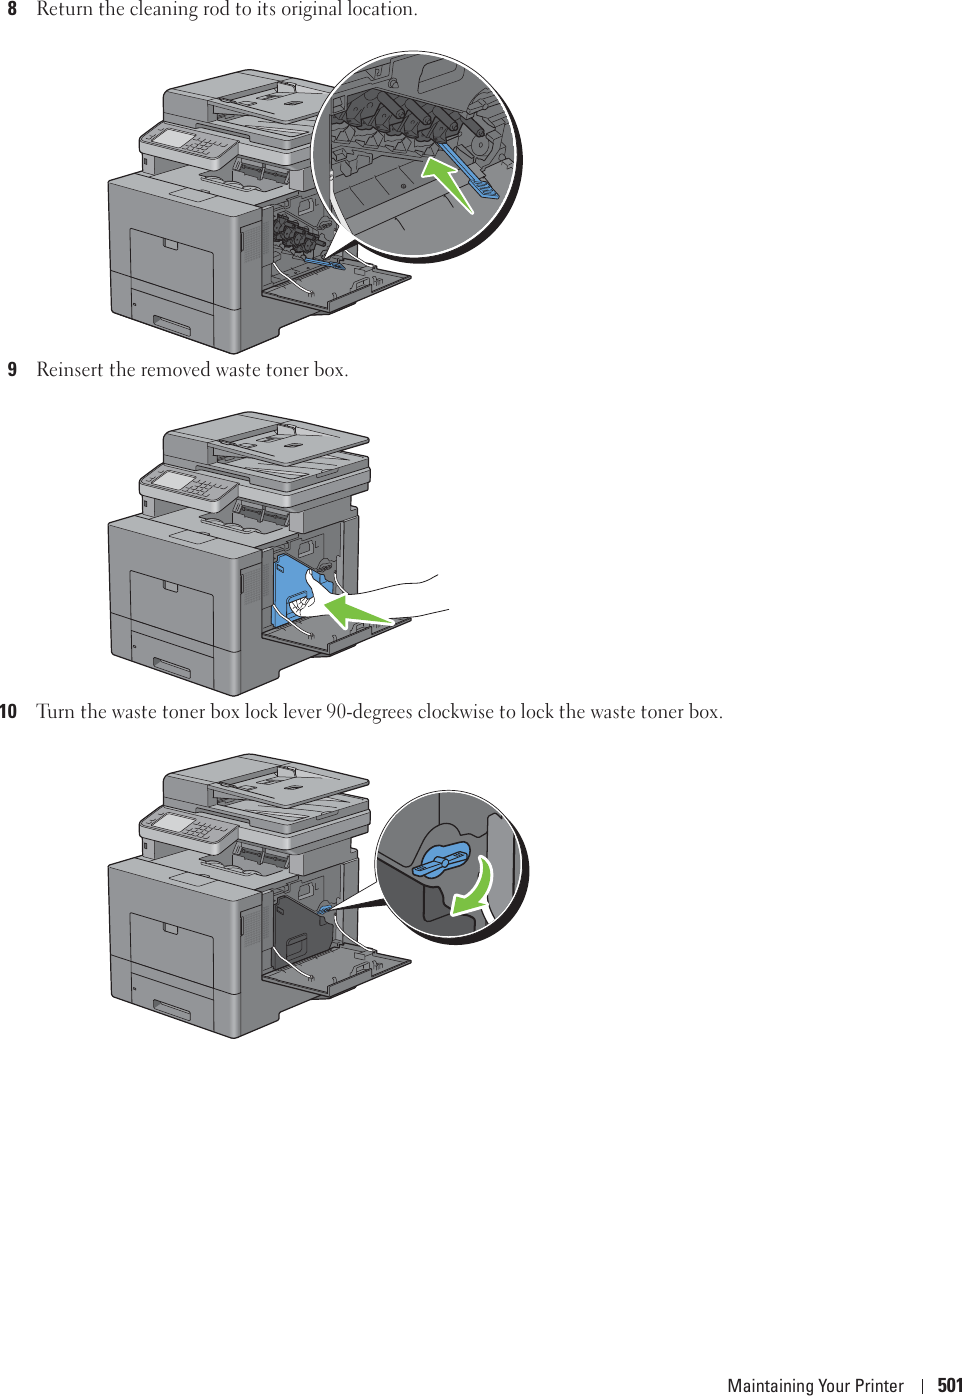 Maintaining Your Printer 5018Return the cleaning rod to its original location.9Reinsert the removed waste toner box.10Turn the waste toner box lock lever 90-degrees clockwise to lock the waste toner box.